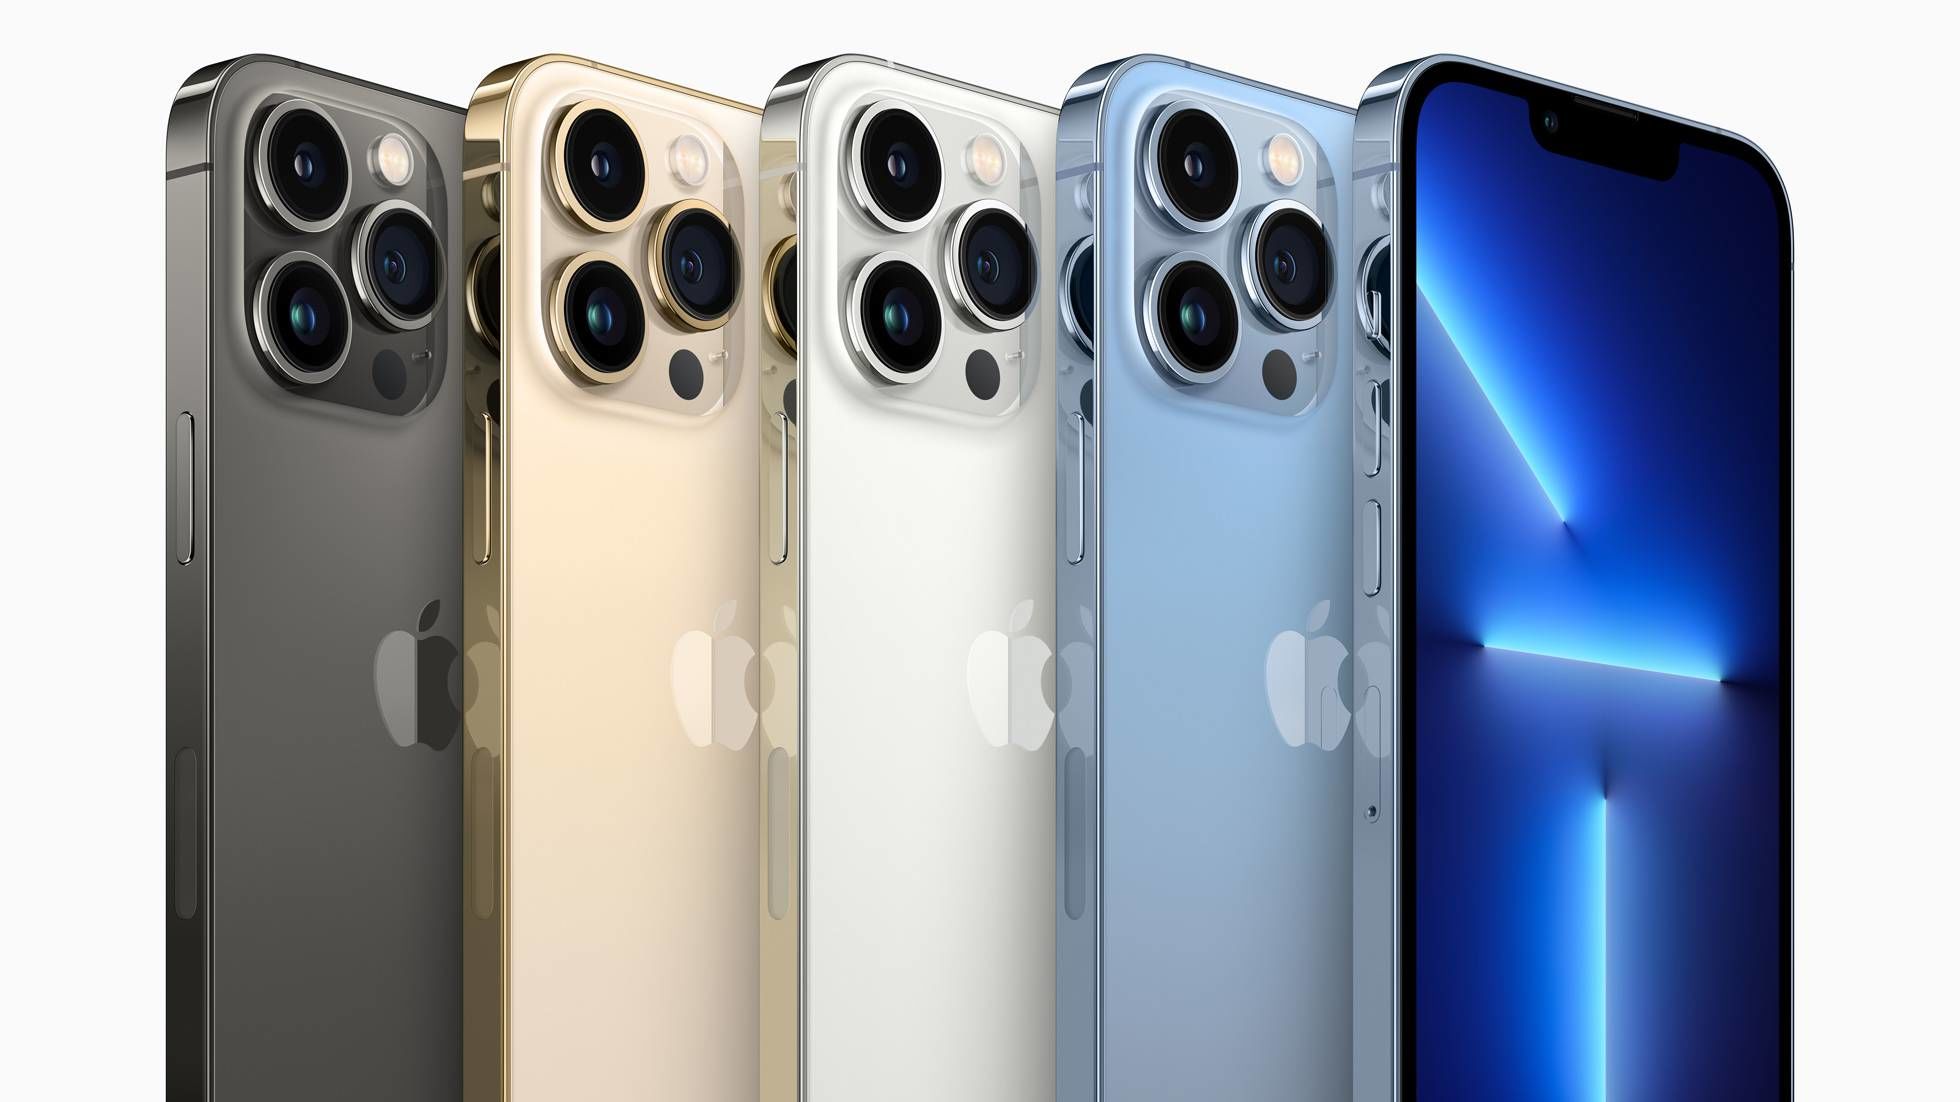 iPhone 12 Pro vs iPhone 13 Pro: Which Apple smartphone should you buy?